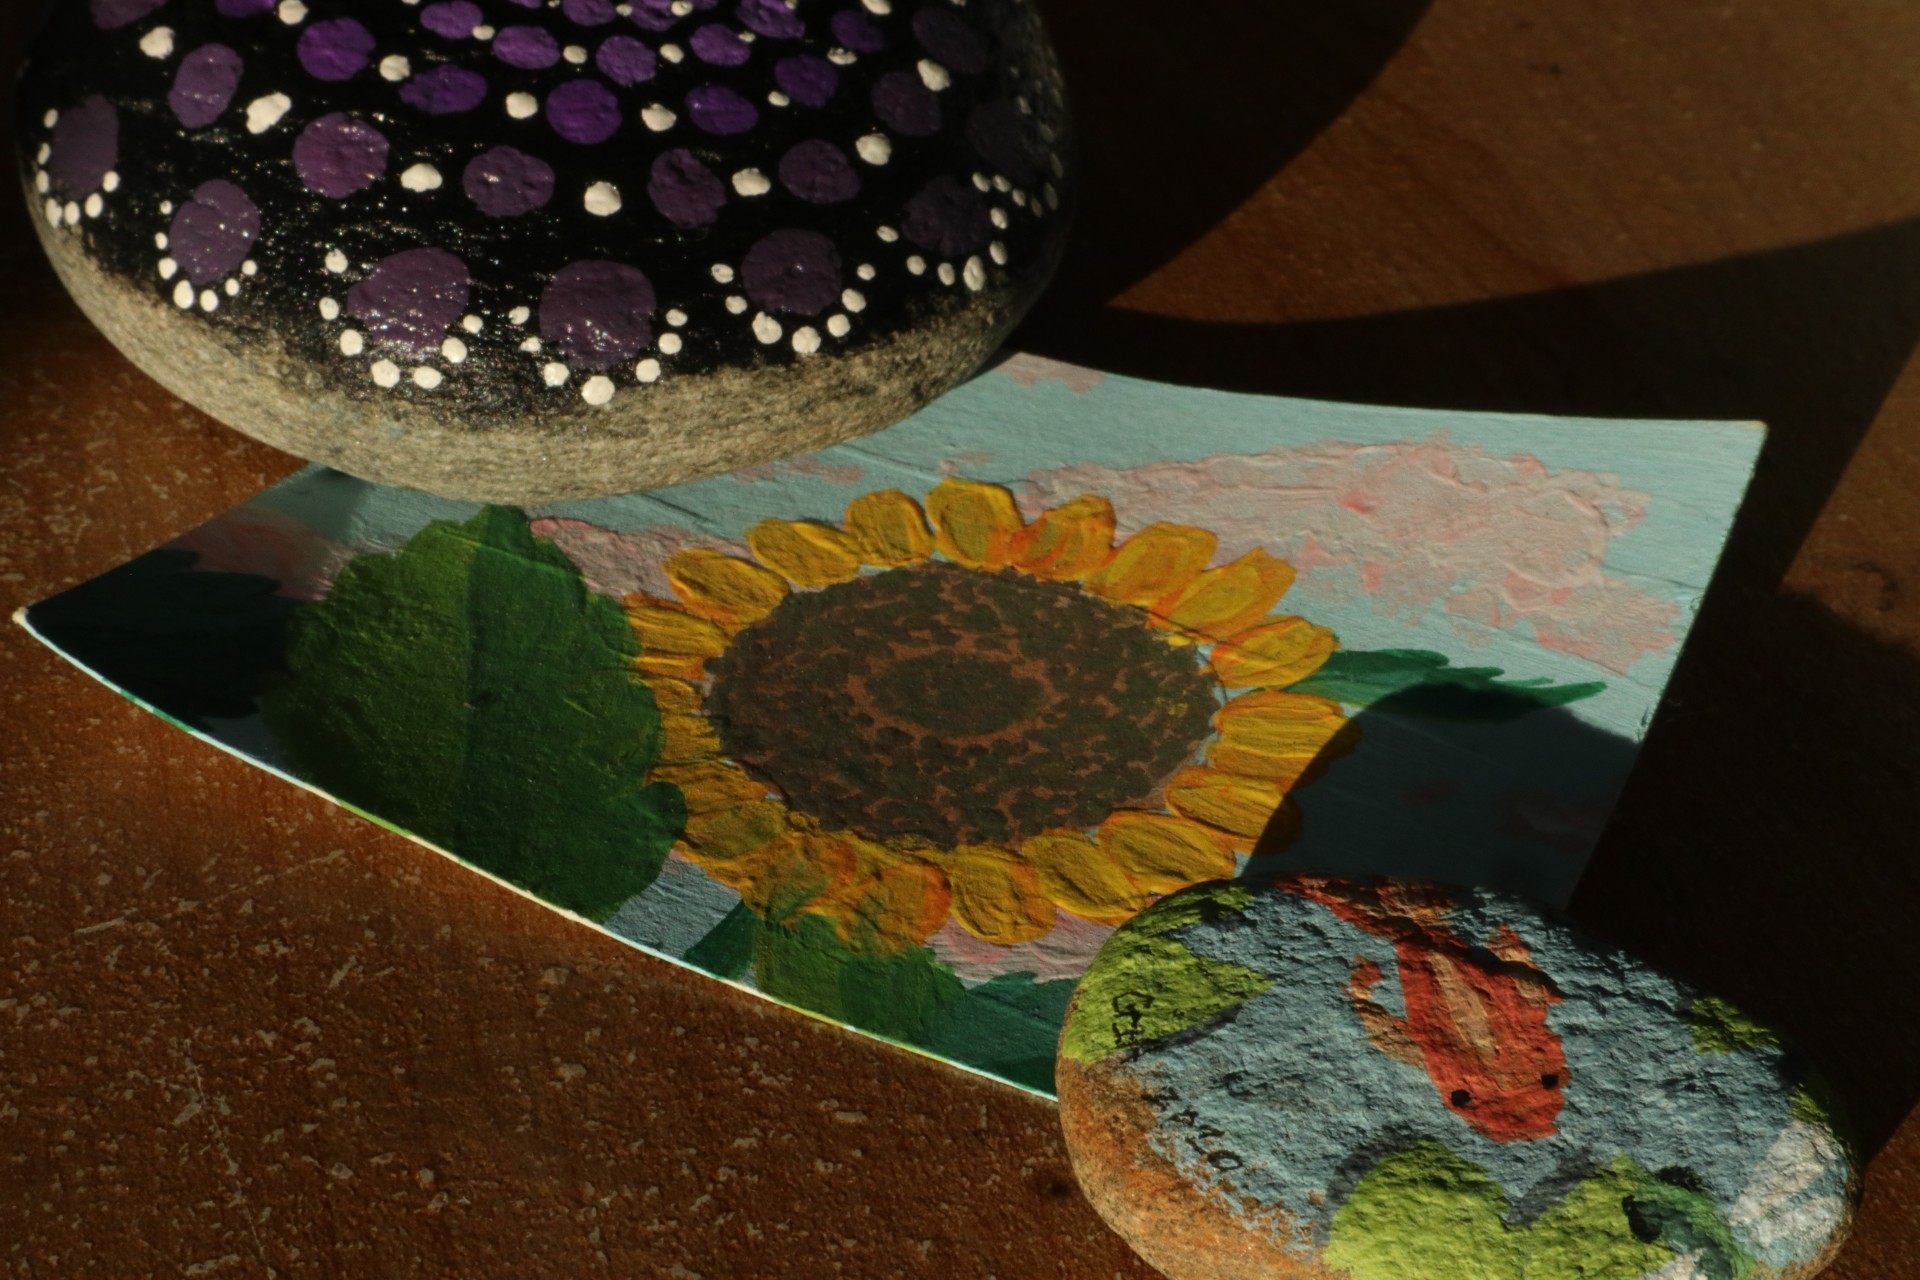 One large rock with a black background with symmetric gradient purple and white dots and a smaller rock with a painted kio fish pond holding down an acrylic sunflower painting